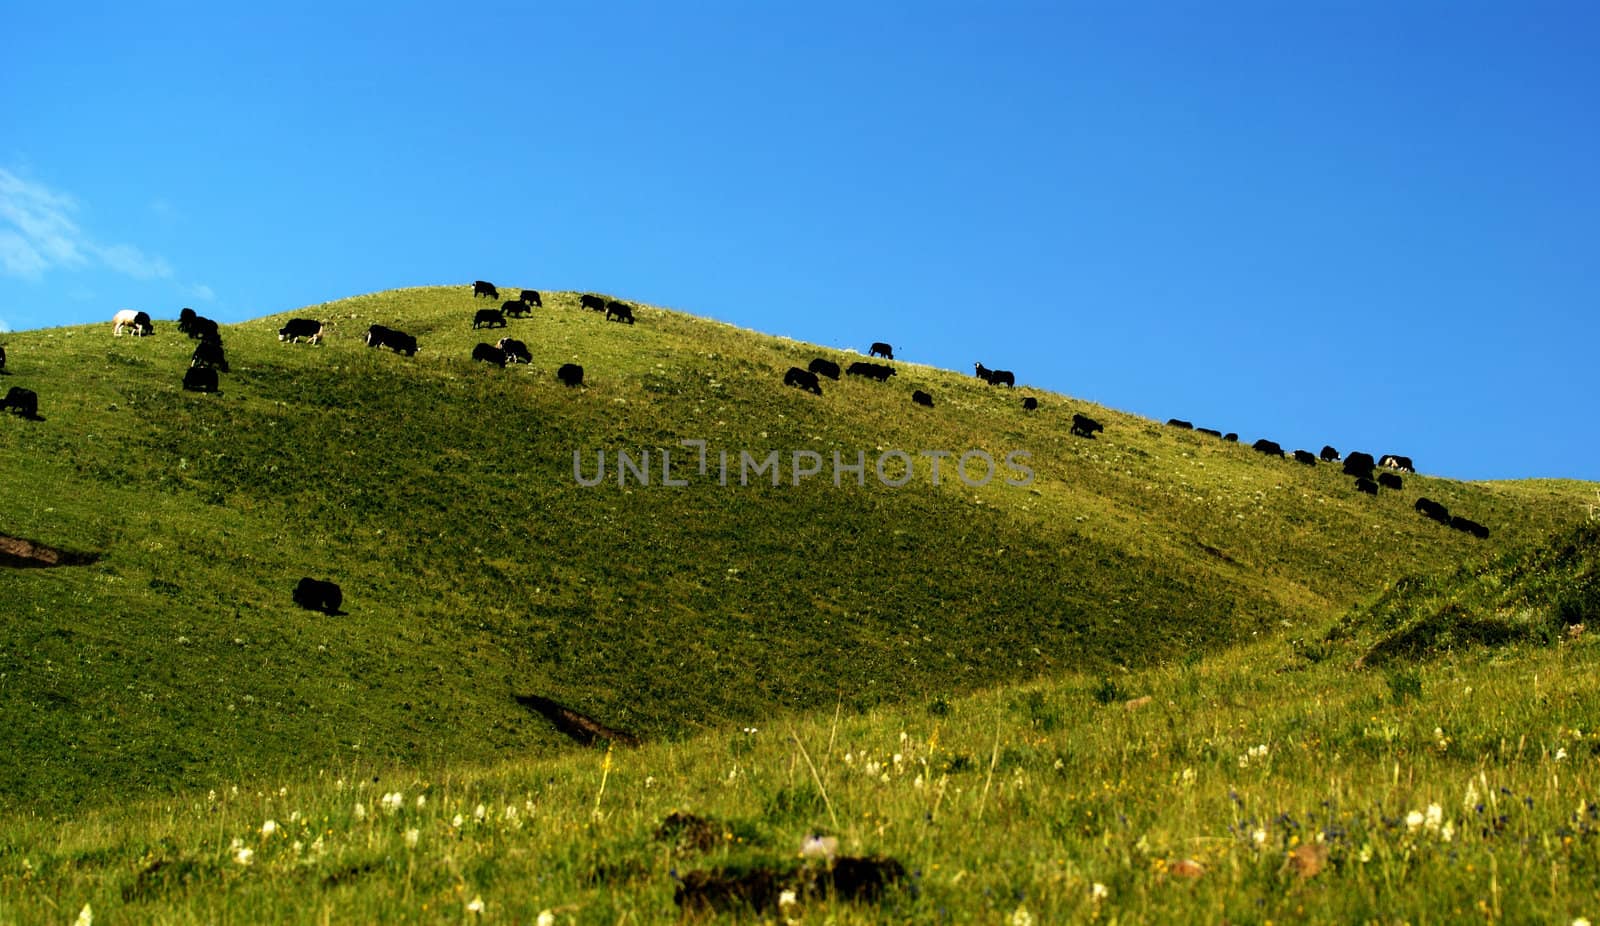 A herd of cattle in the meadow, summer landscape by xfdly5